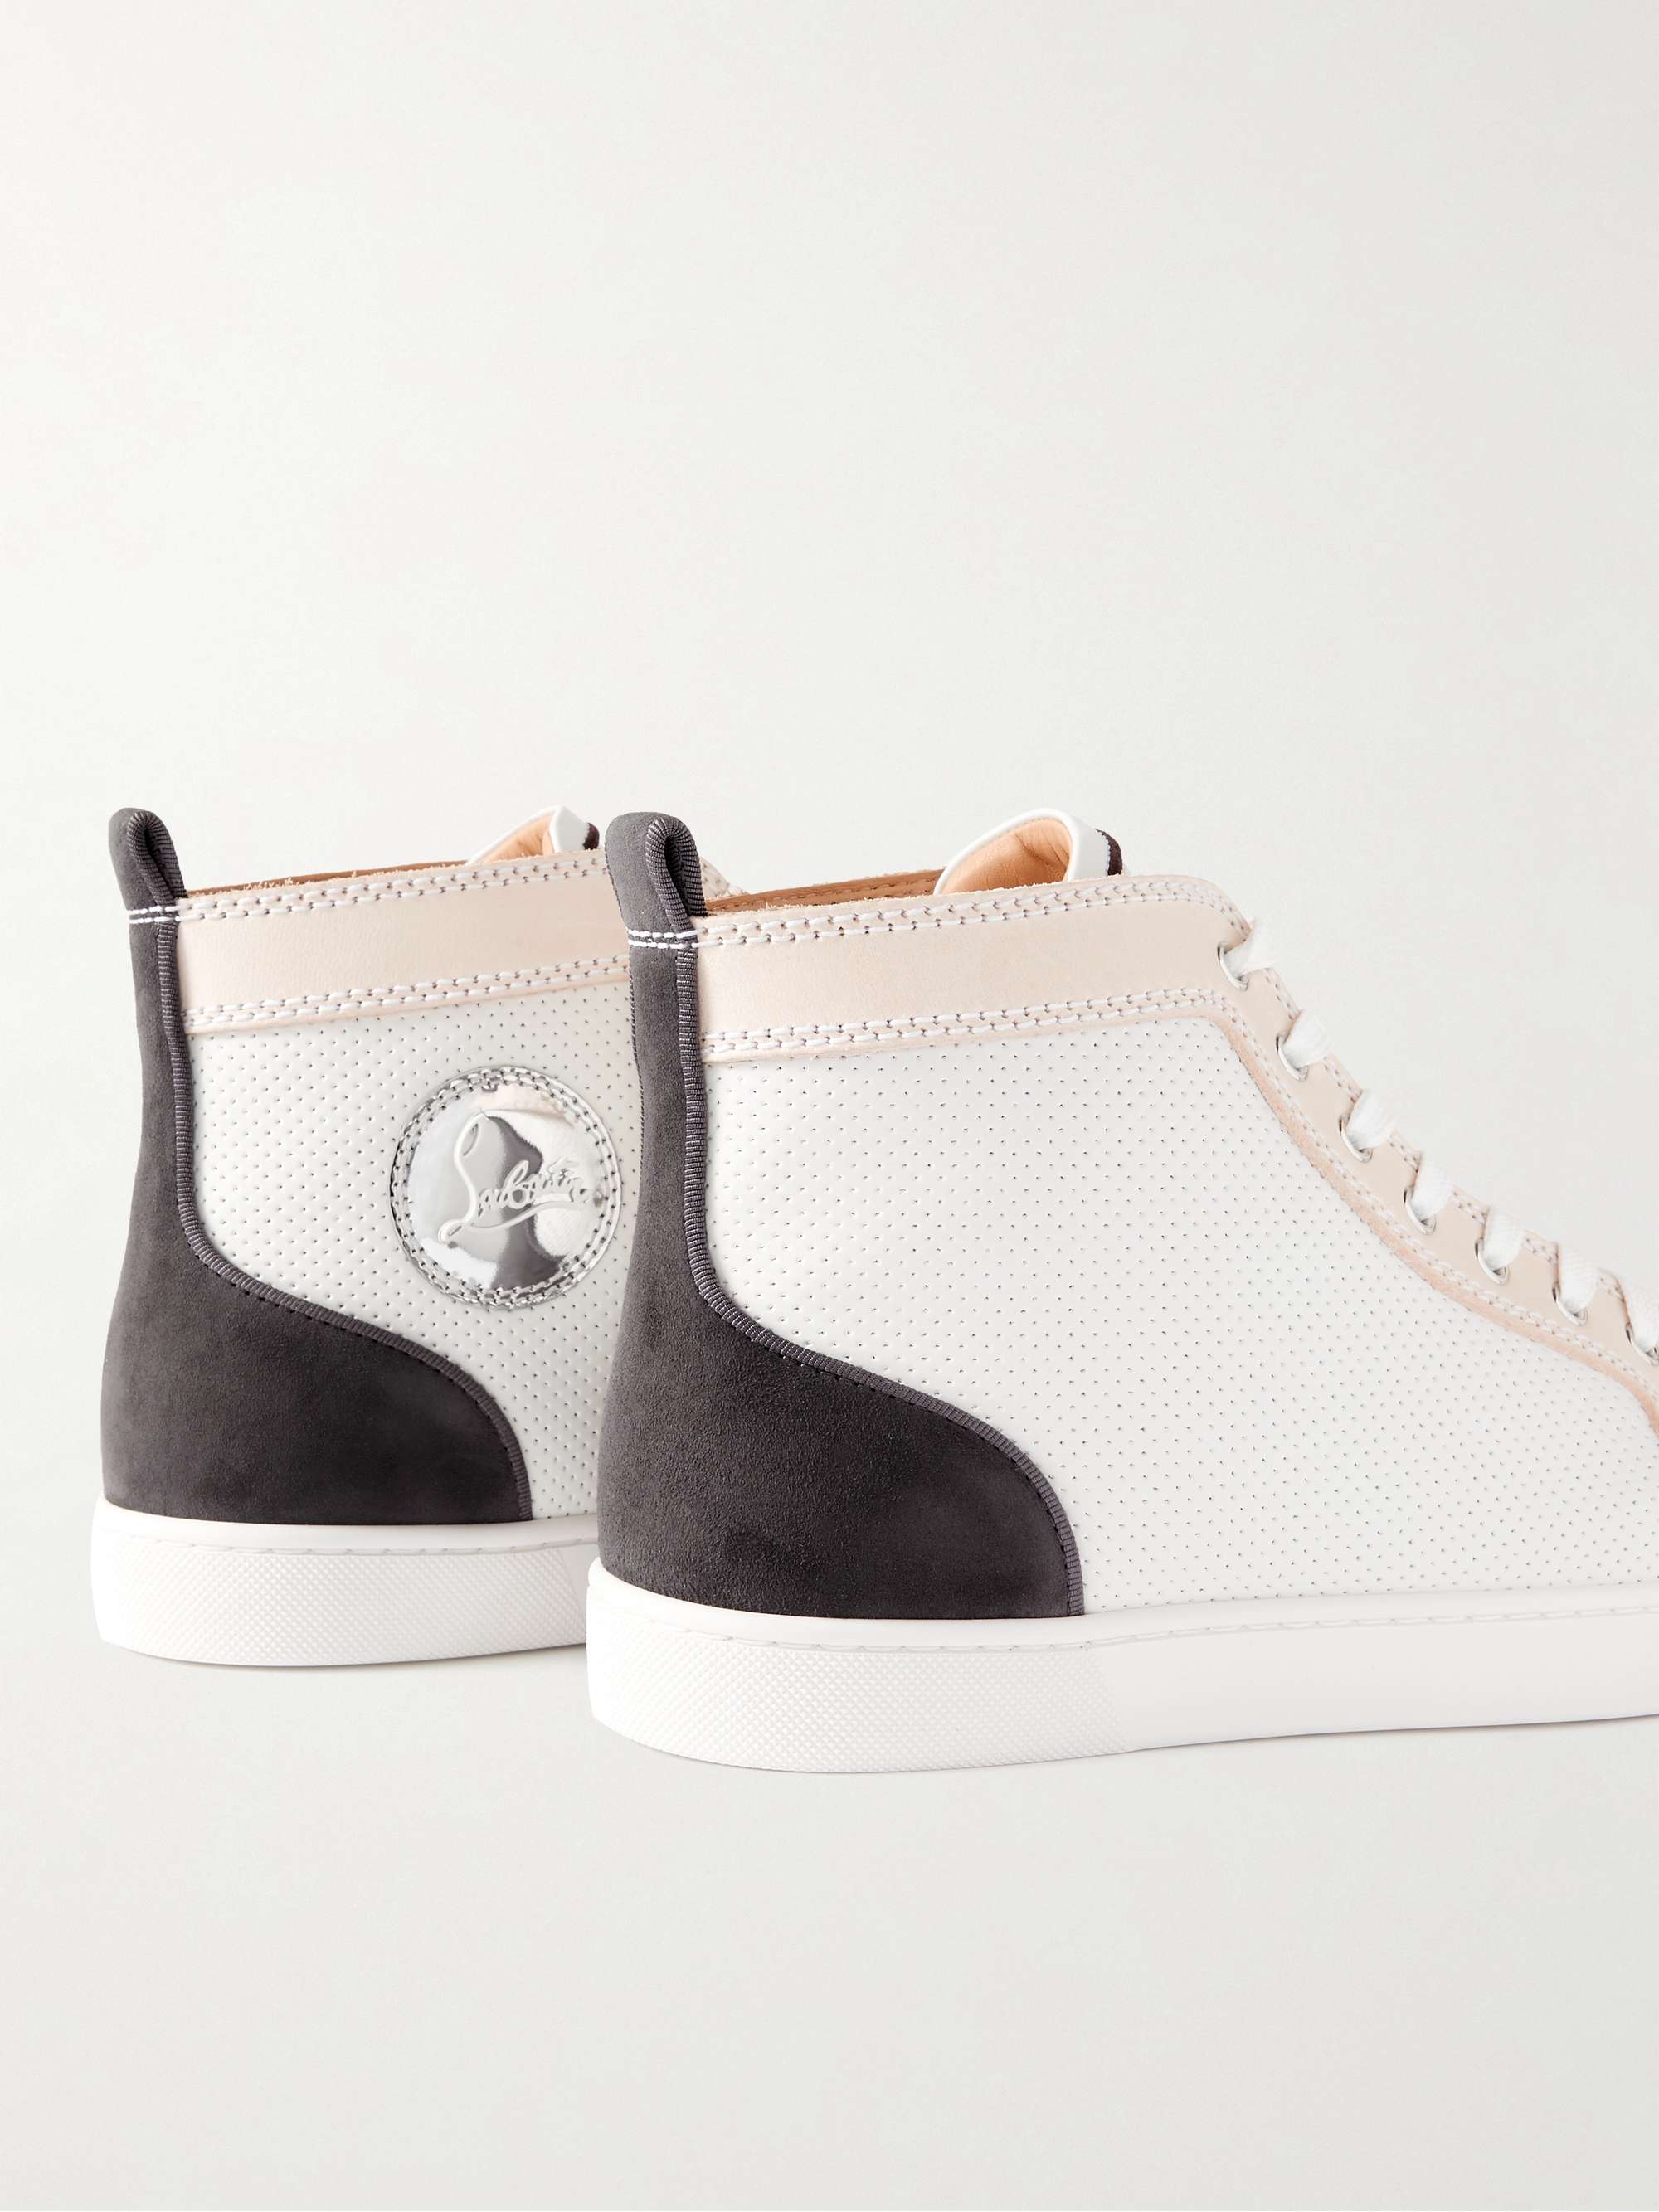 CHRISTIAN LOUBOUTIN Louis Suede-Trimmed Perforated Leather High-Top Sneakers